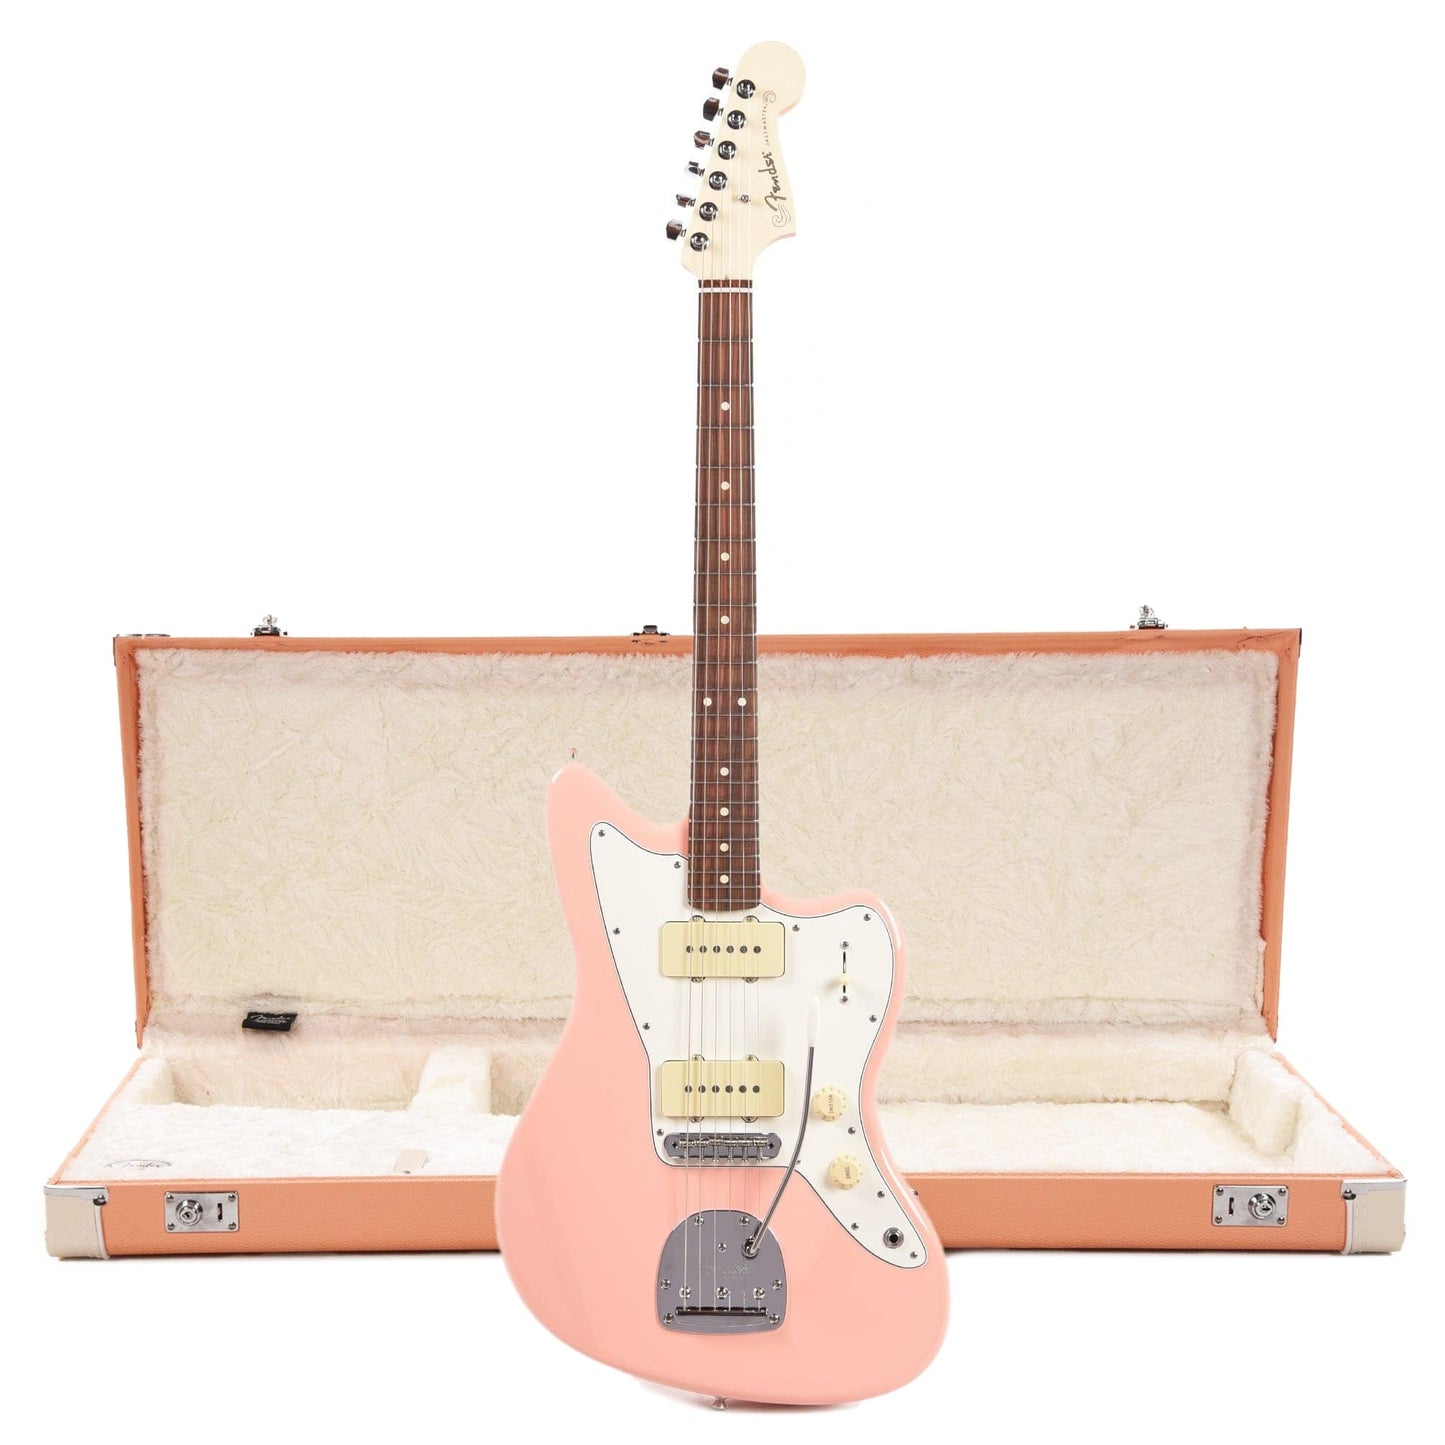 Fender Player Jazzmaster Shell Pink w/Olympic White Headcap, Pure Vintage '65 Pickups, & Series/Parallel 4-Way and Classic Series Wood Case Jazzmaster/Jaguar Pacific Peach (CME Exclusive) Electric Guitars / Solid Body